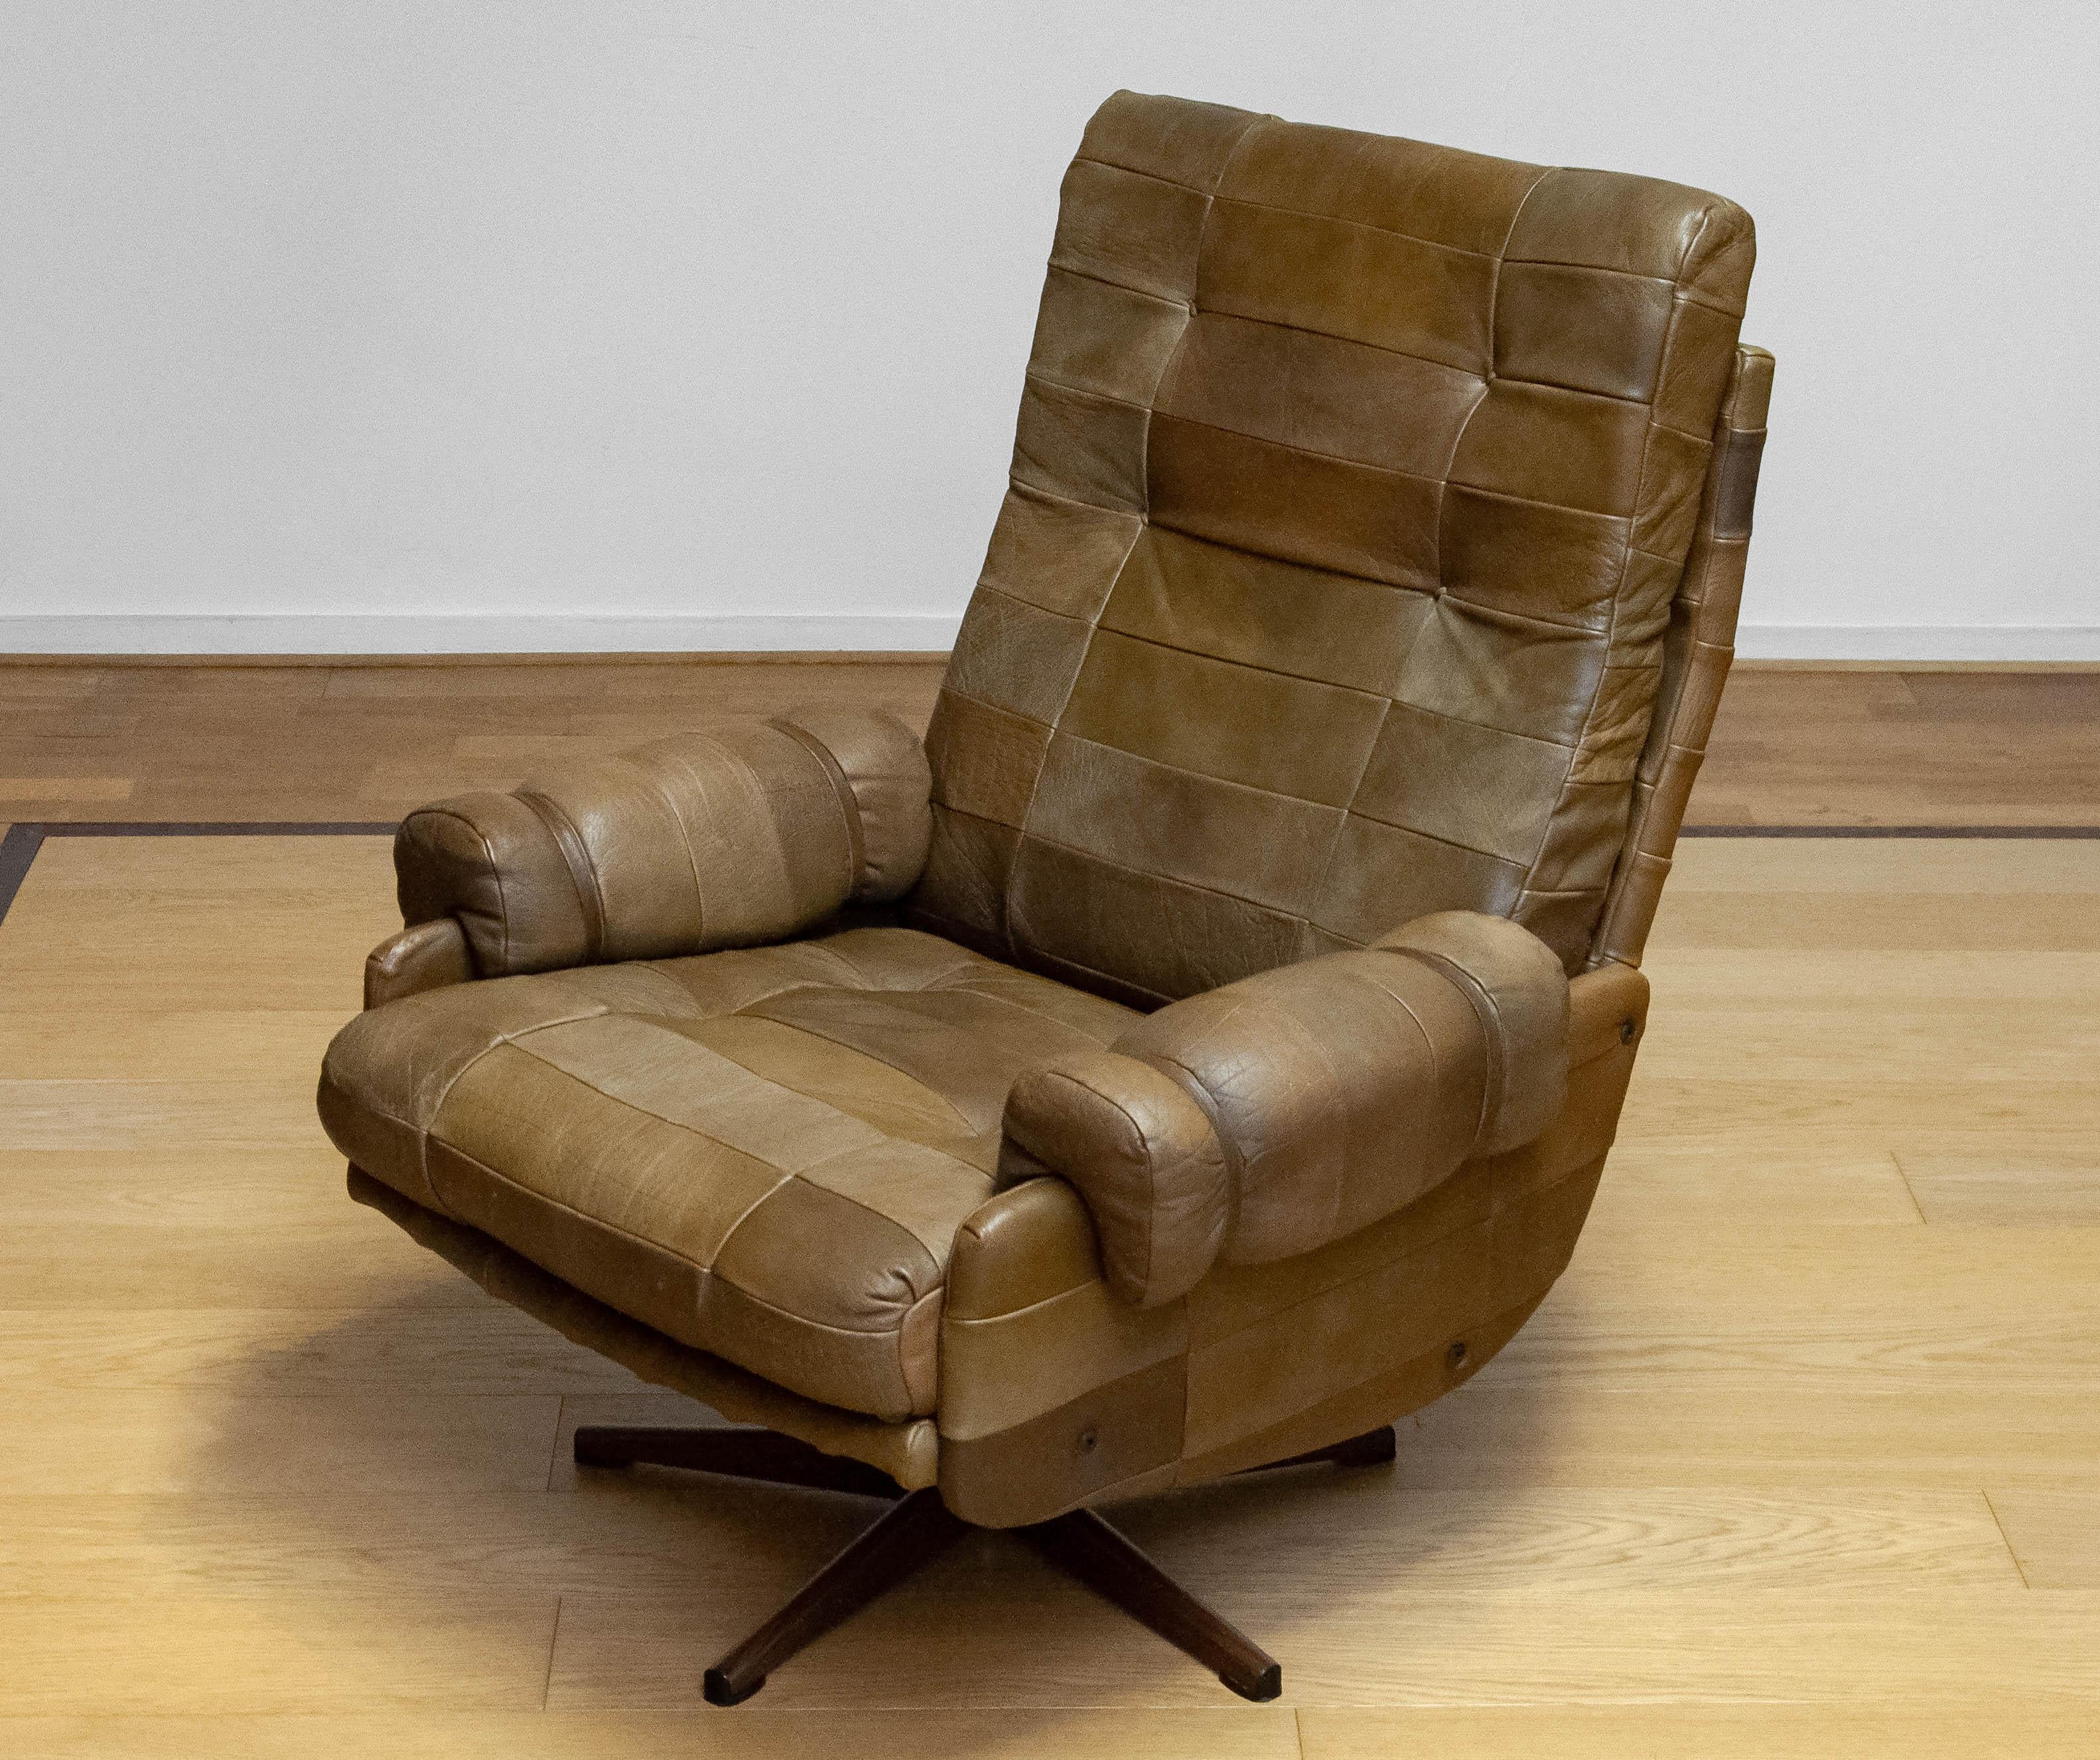 70s Swivel Chair By Arne Norell Möbel AB In Sturdy Olive Green Buffalo Leather 2